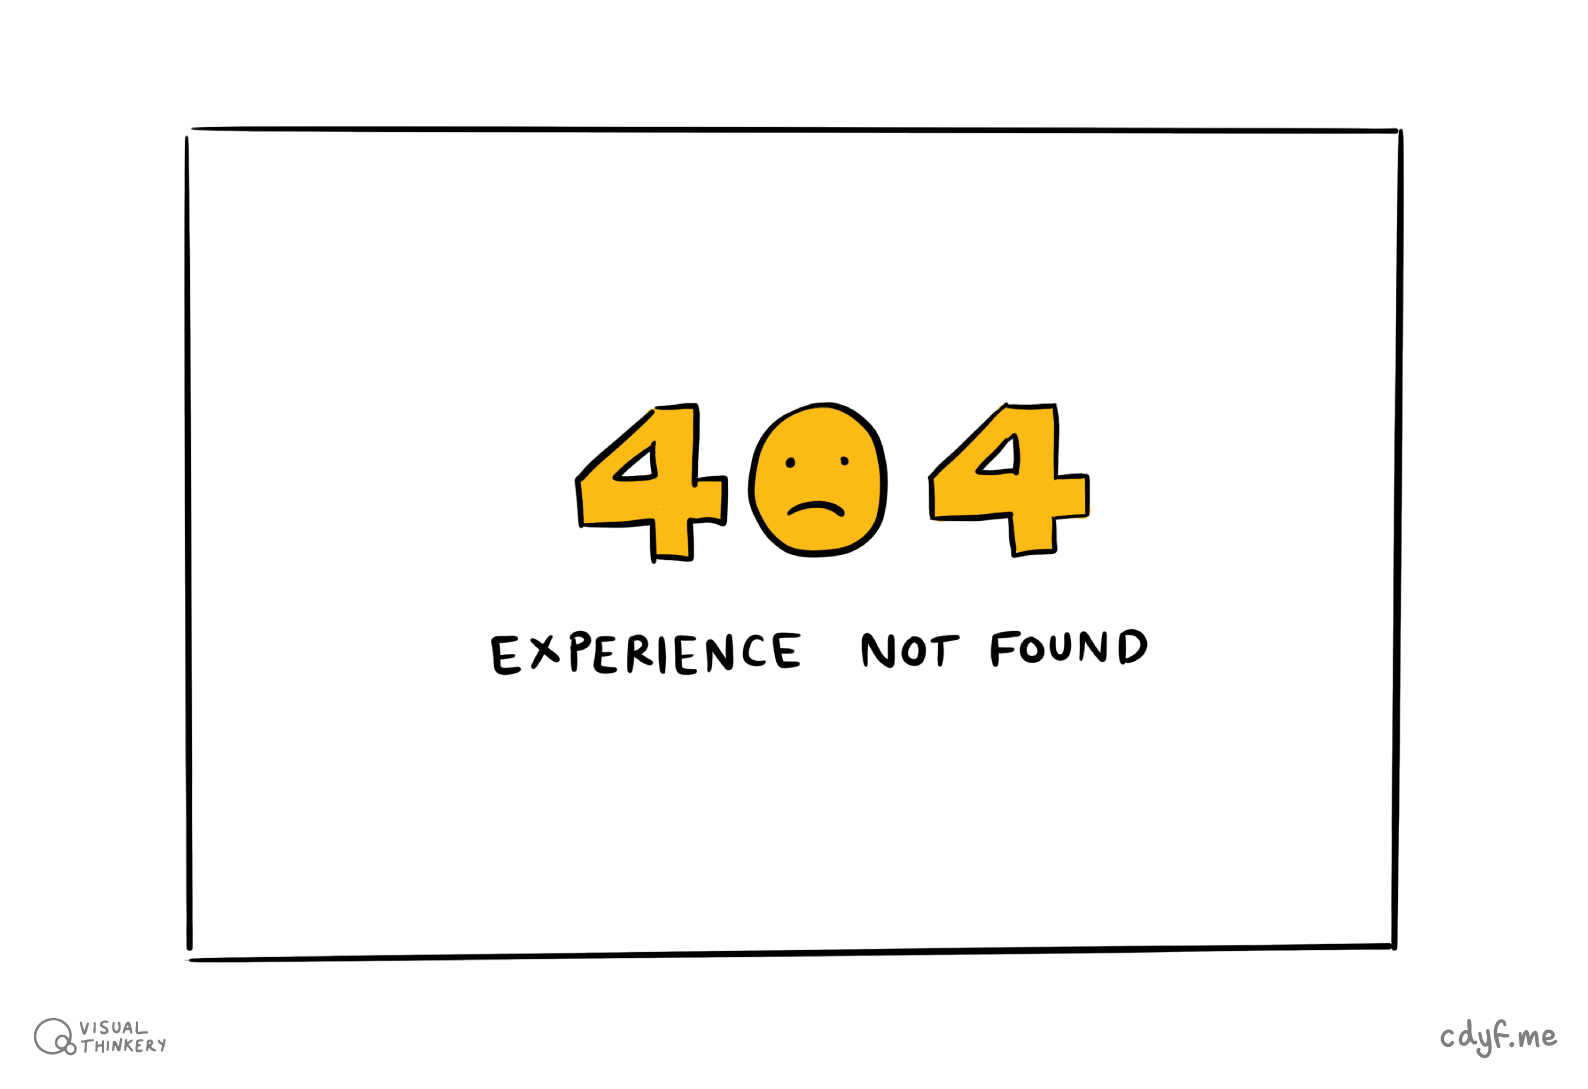 Do you respond with a sheepish experience not found when people ask about your experience? Is your experience like the classic page not found error message HTTP 404? The client sent you a valid request for your experience, but your server couldn’t find it. Awkward. Embarrassing silence? 😳 Don’t worry, there are some simple and easy ways to build your experience so that instead of negative 404’s, you can respond with a cheerfully positive 200 (OK), as described in this list of HTTP status codes. We’ll look at some of them in this chapter. Experience not found sketch by Visual Thinkery is licensed under CC-BY-ND